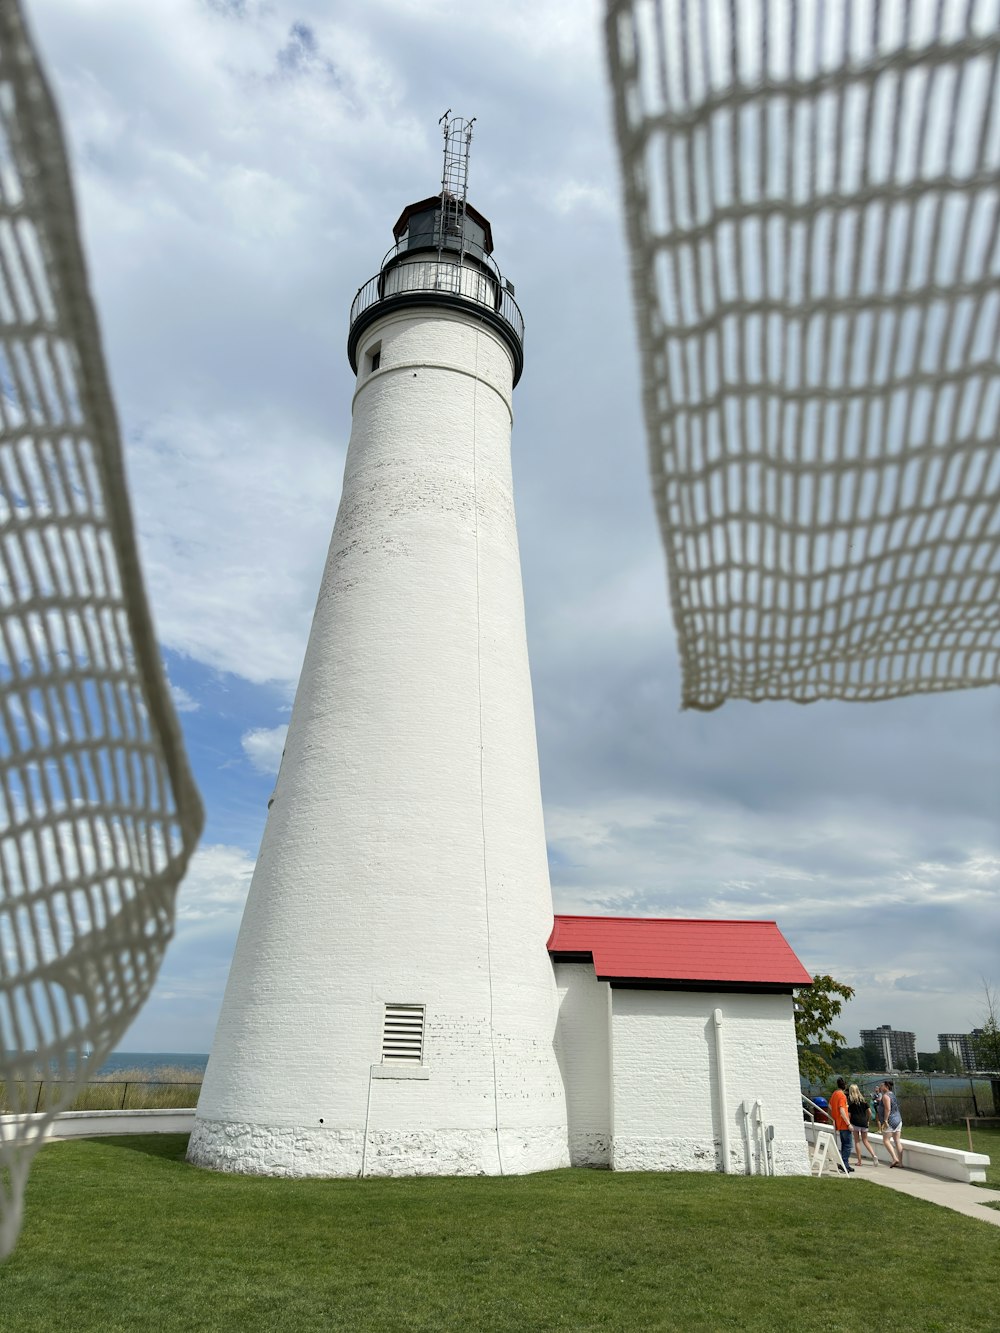 a white lighthouse with a red roof on a cloudy day